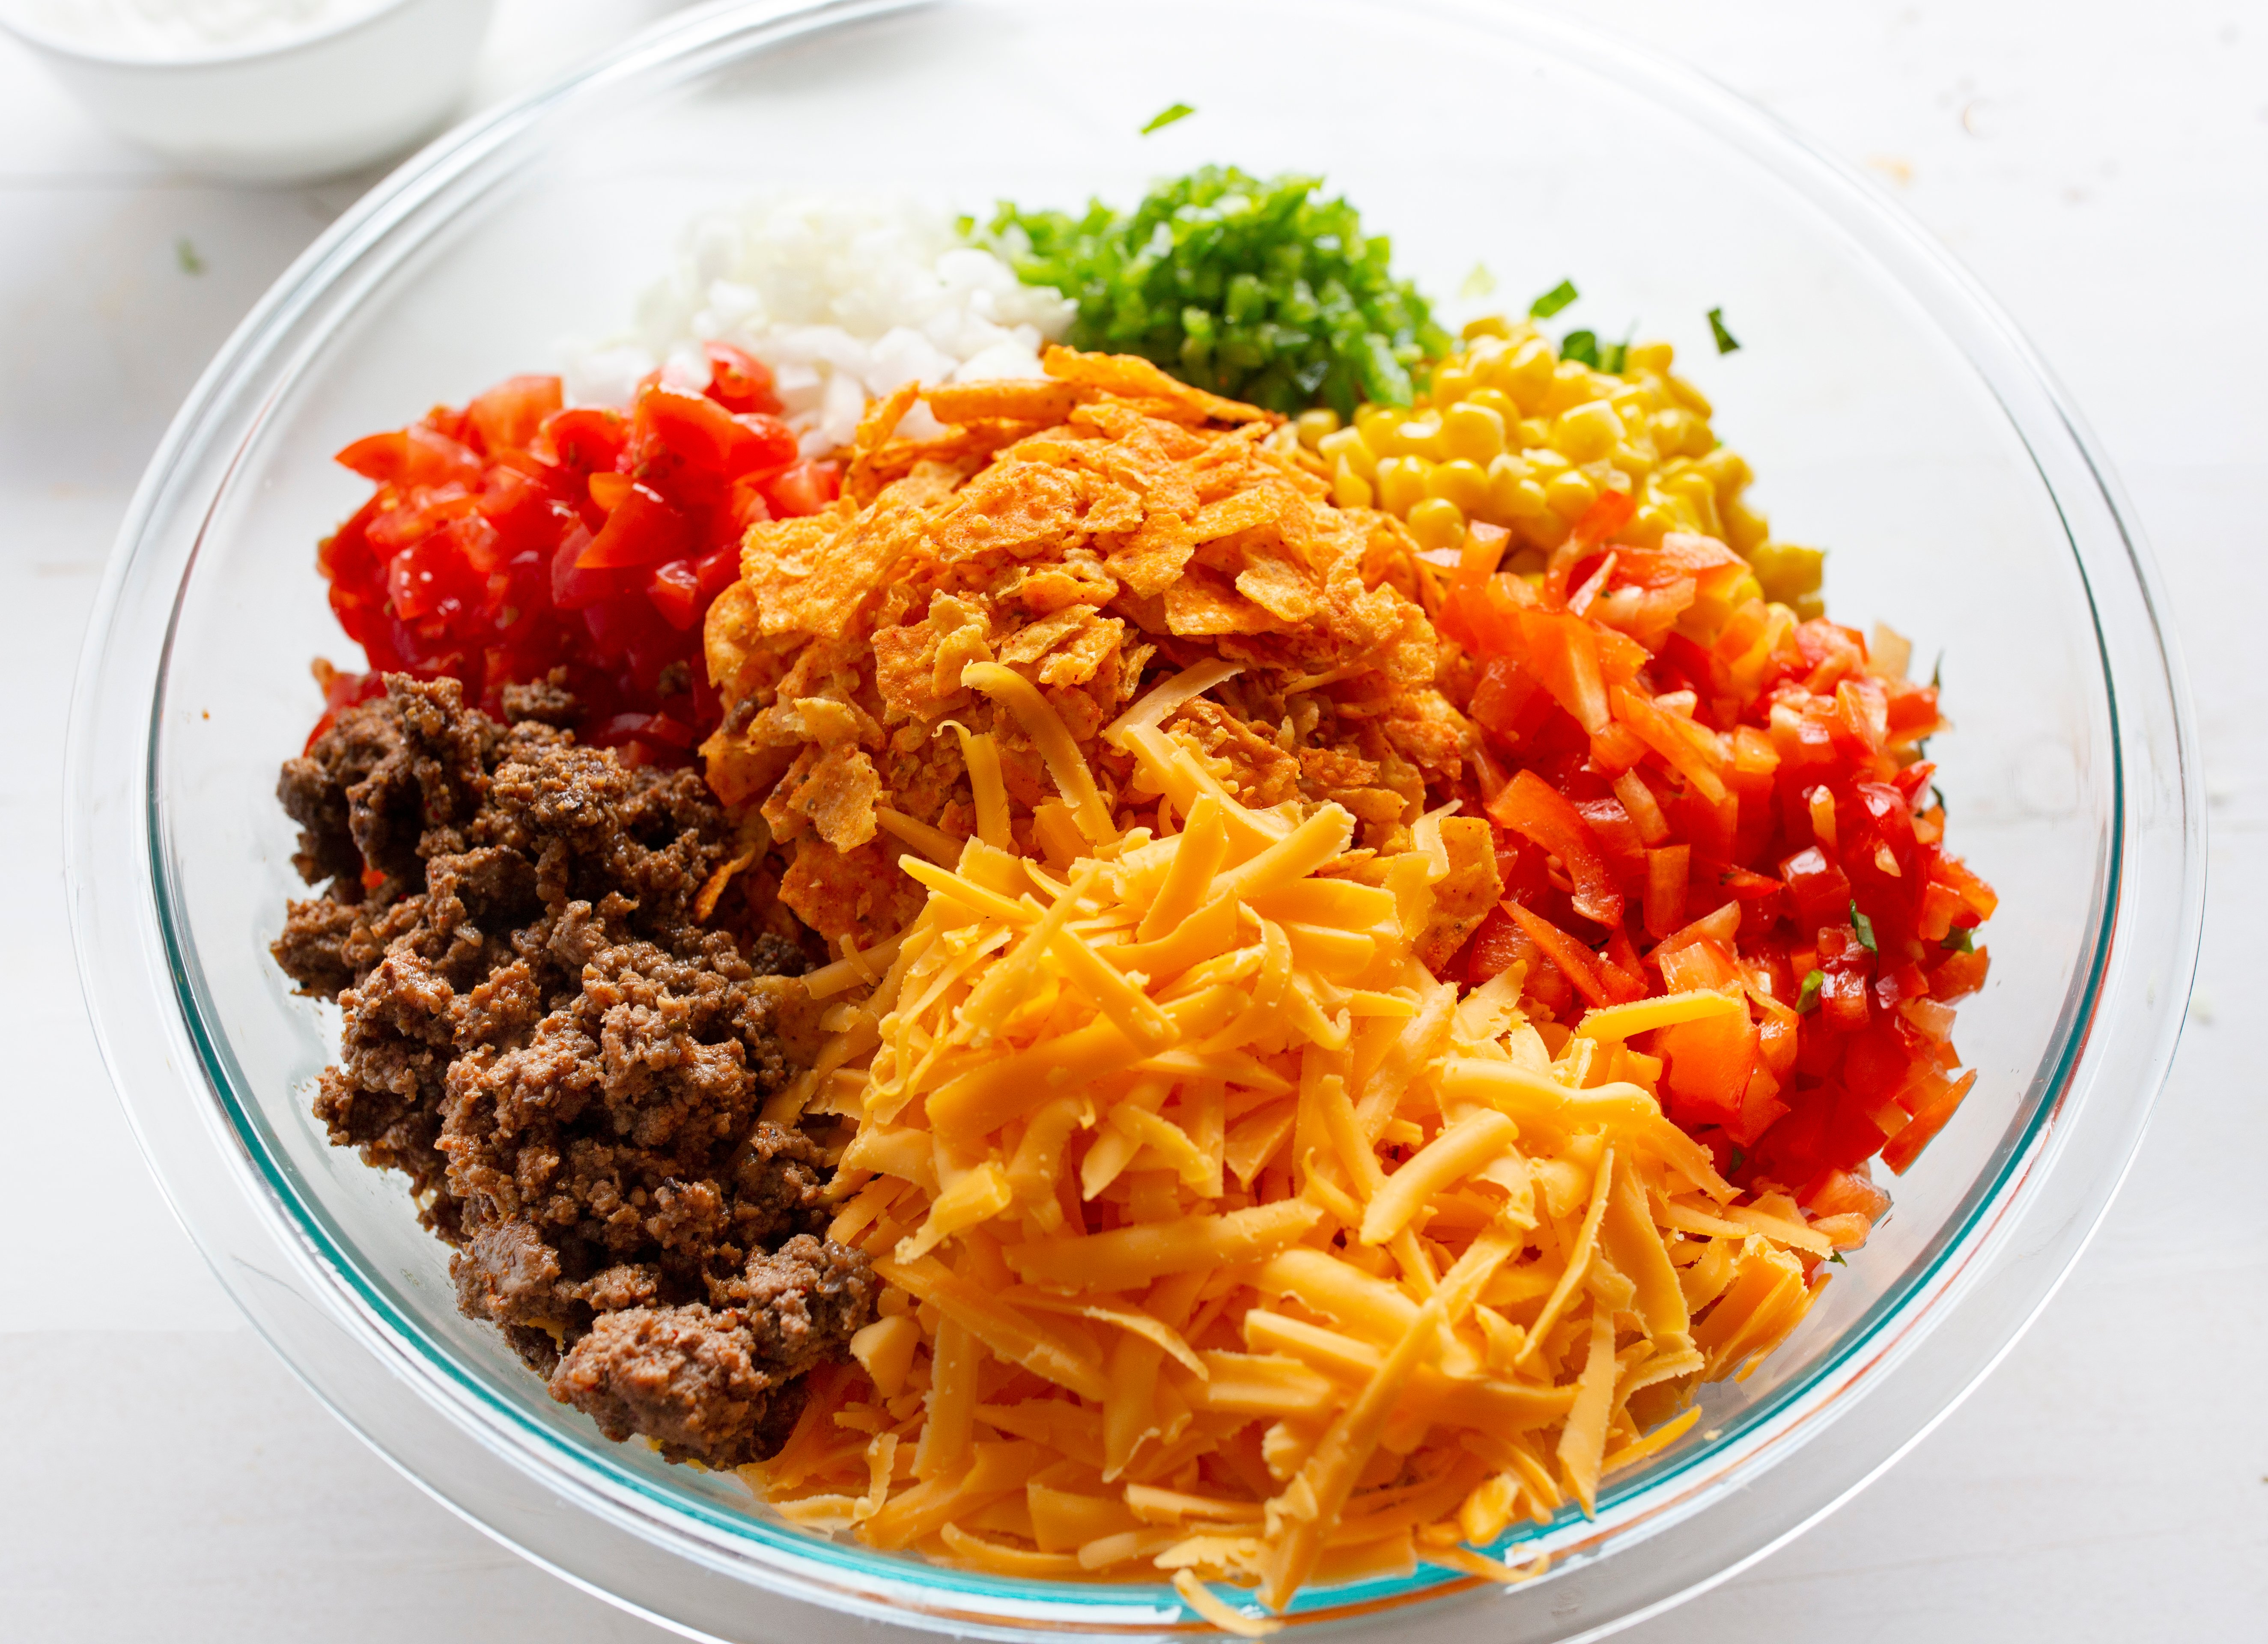 Dorito Taco Salad Ingredients in a Bowl Before Mixing Together.